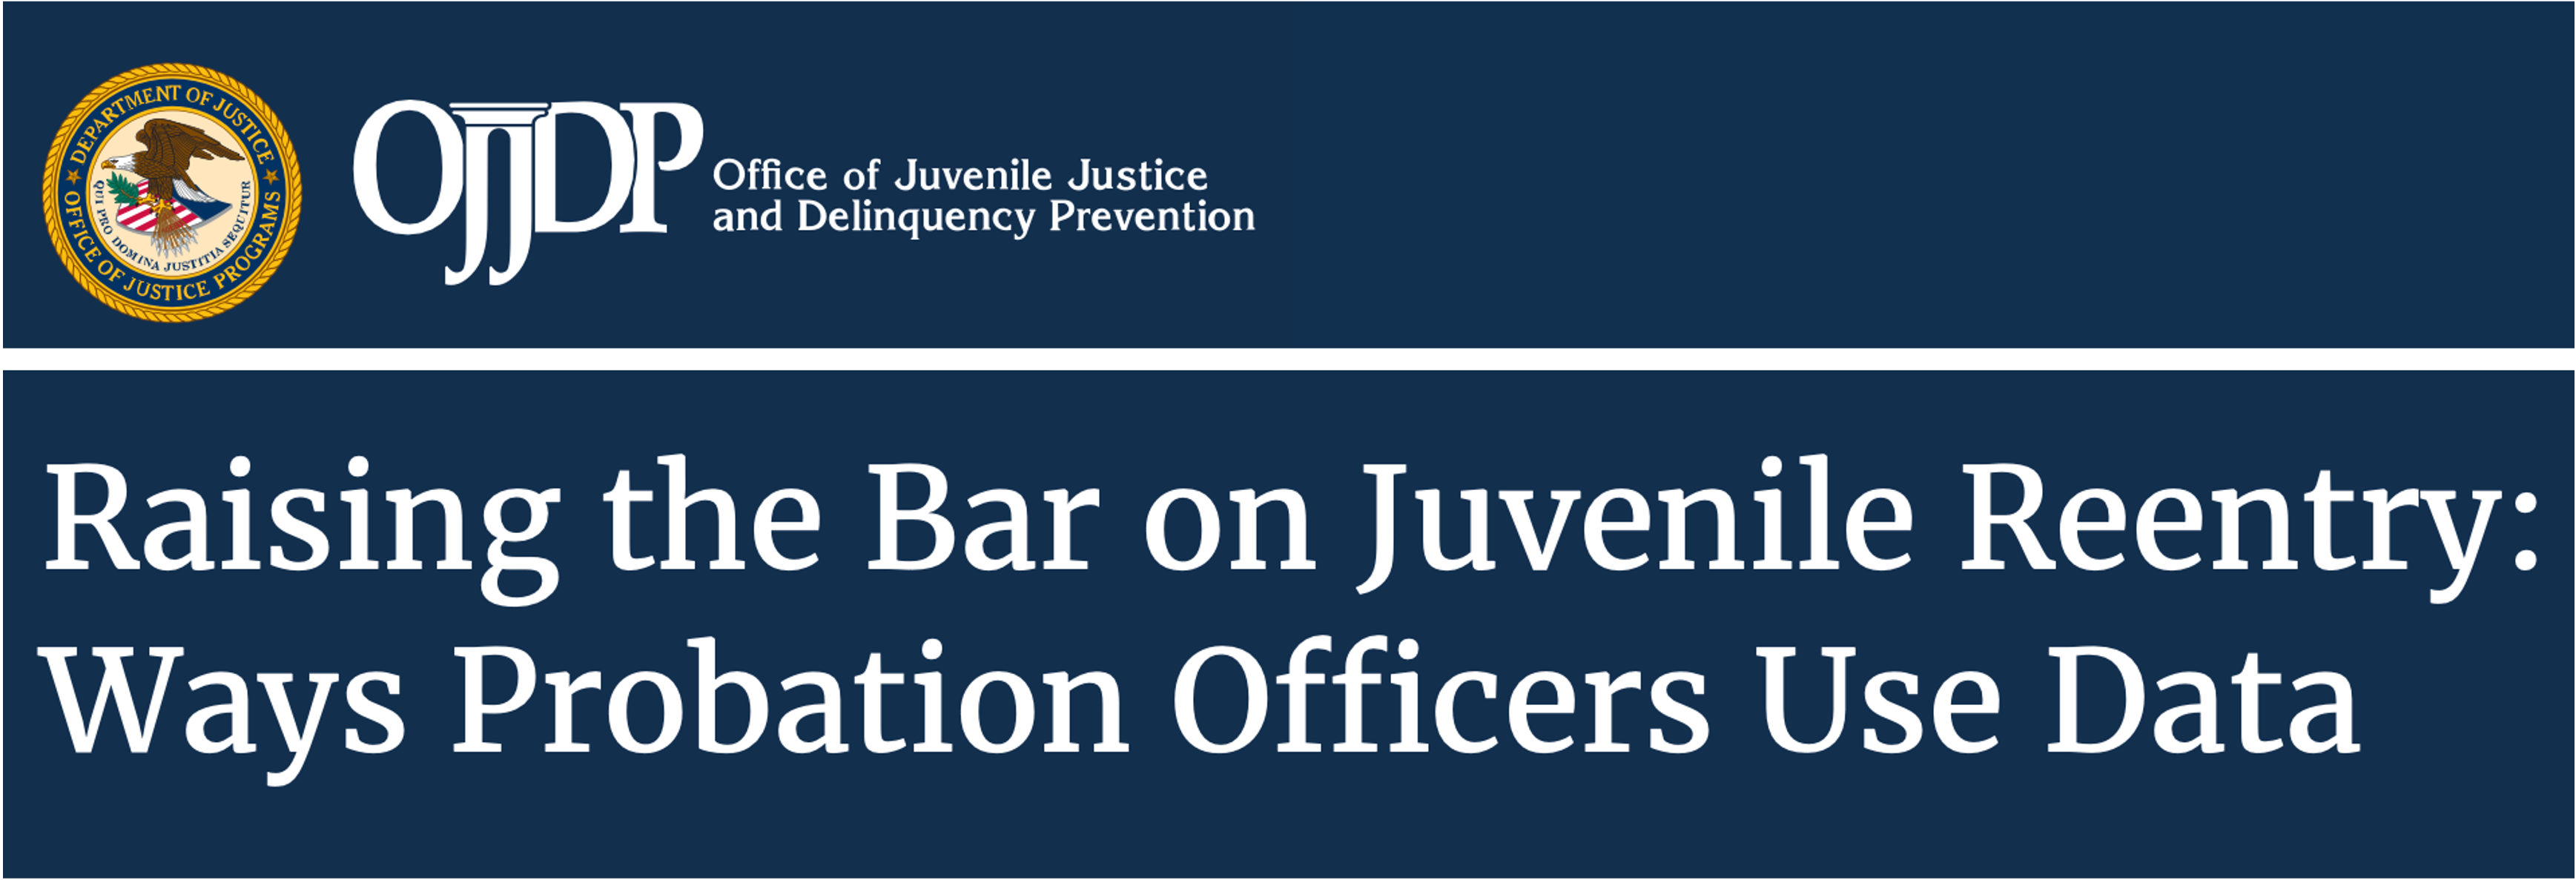 Raising the Bar on Juvenile Reentry: Ways Probation Officers Use Data